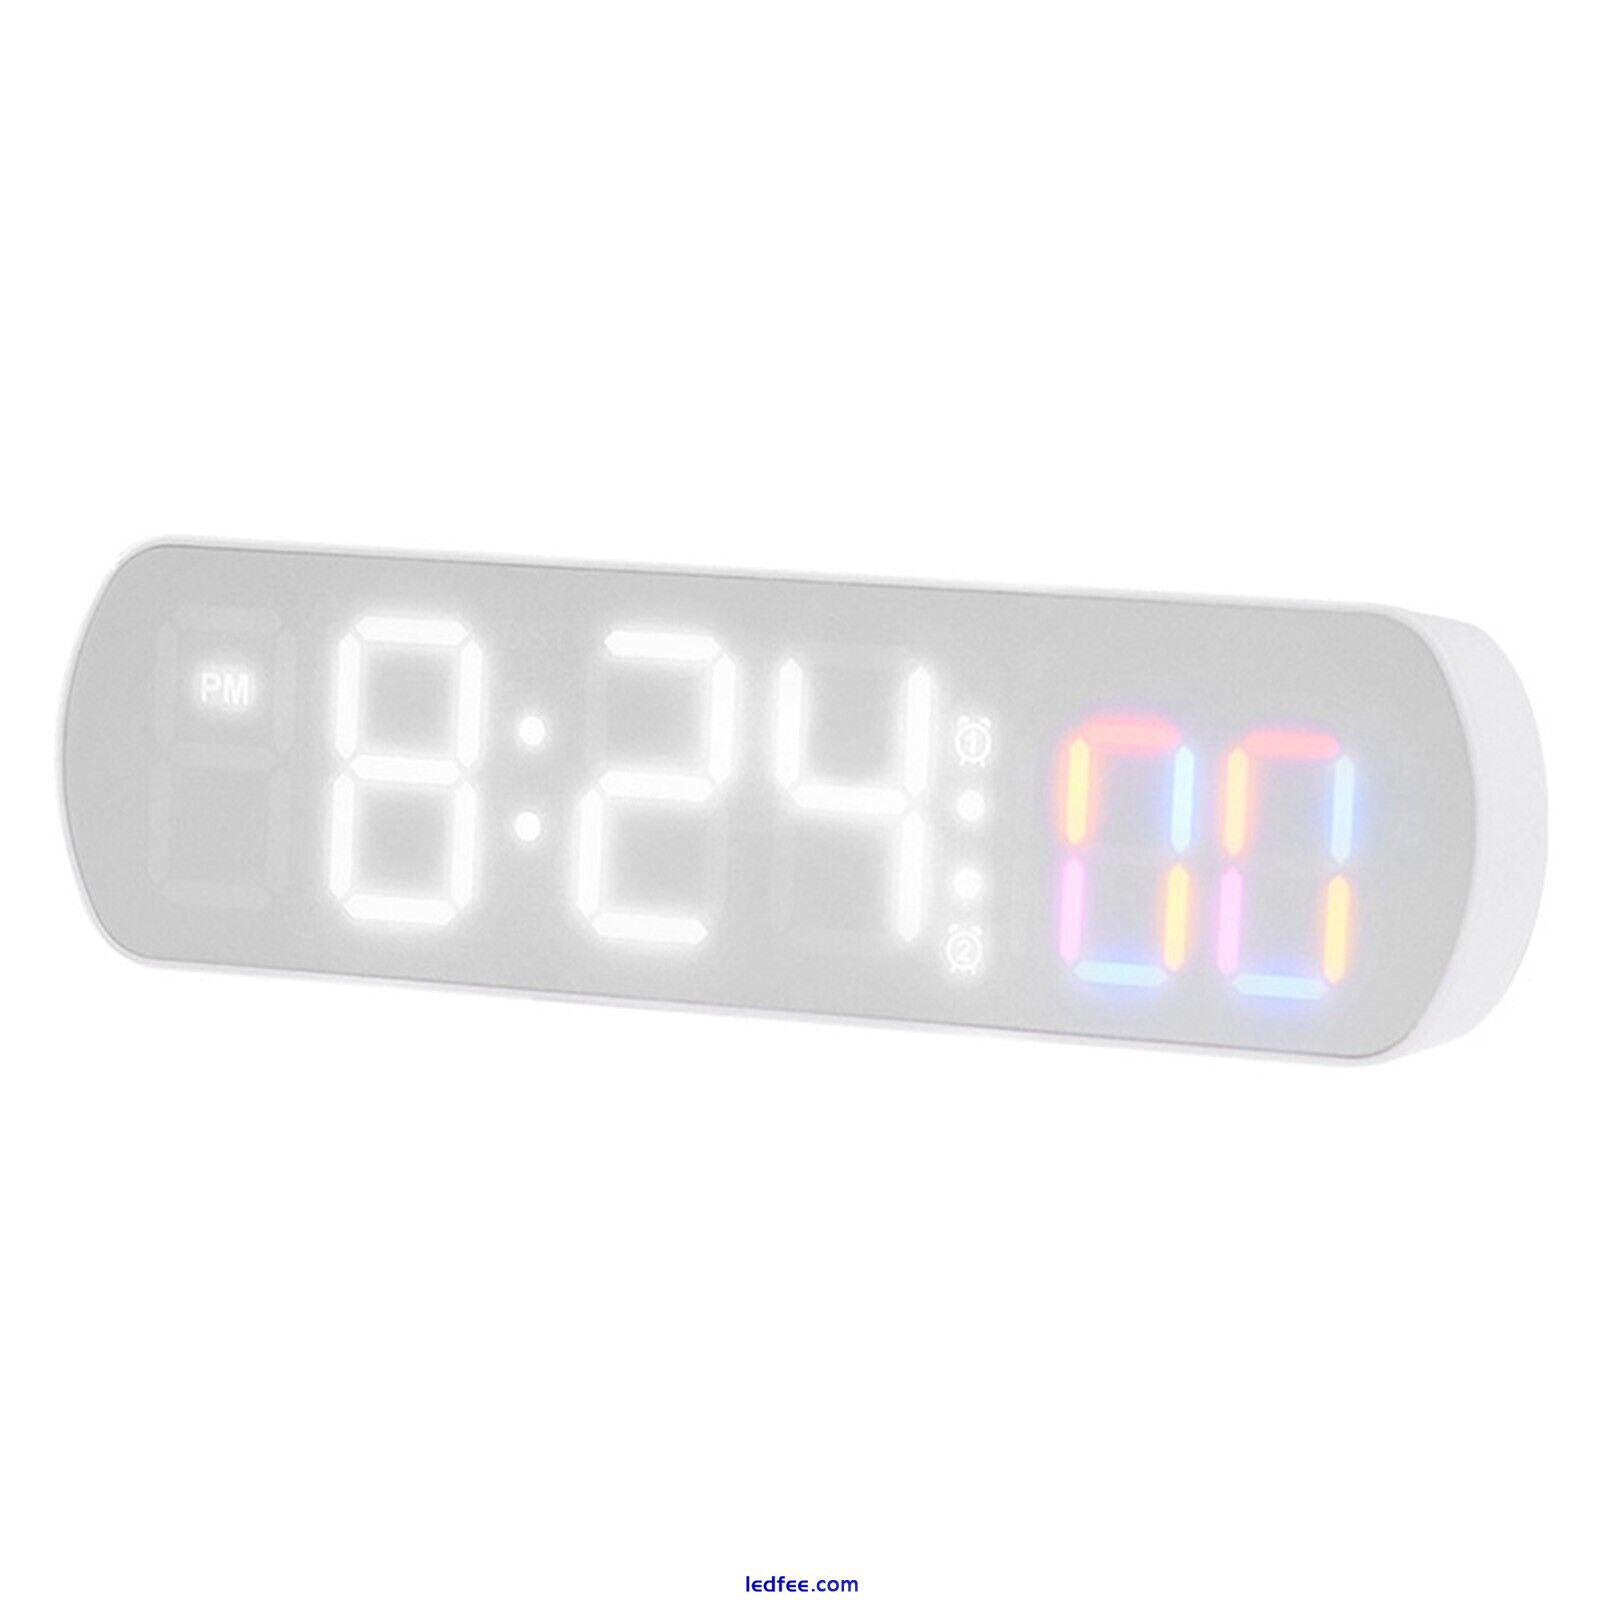 LED Alarm Clock with Countdown/Countdown Function Temperature Humidity Timer 0 